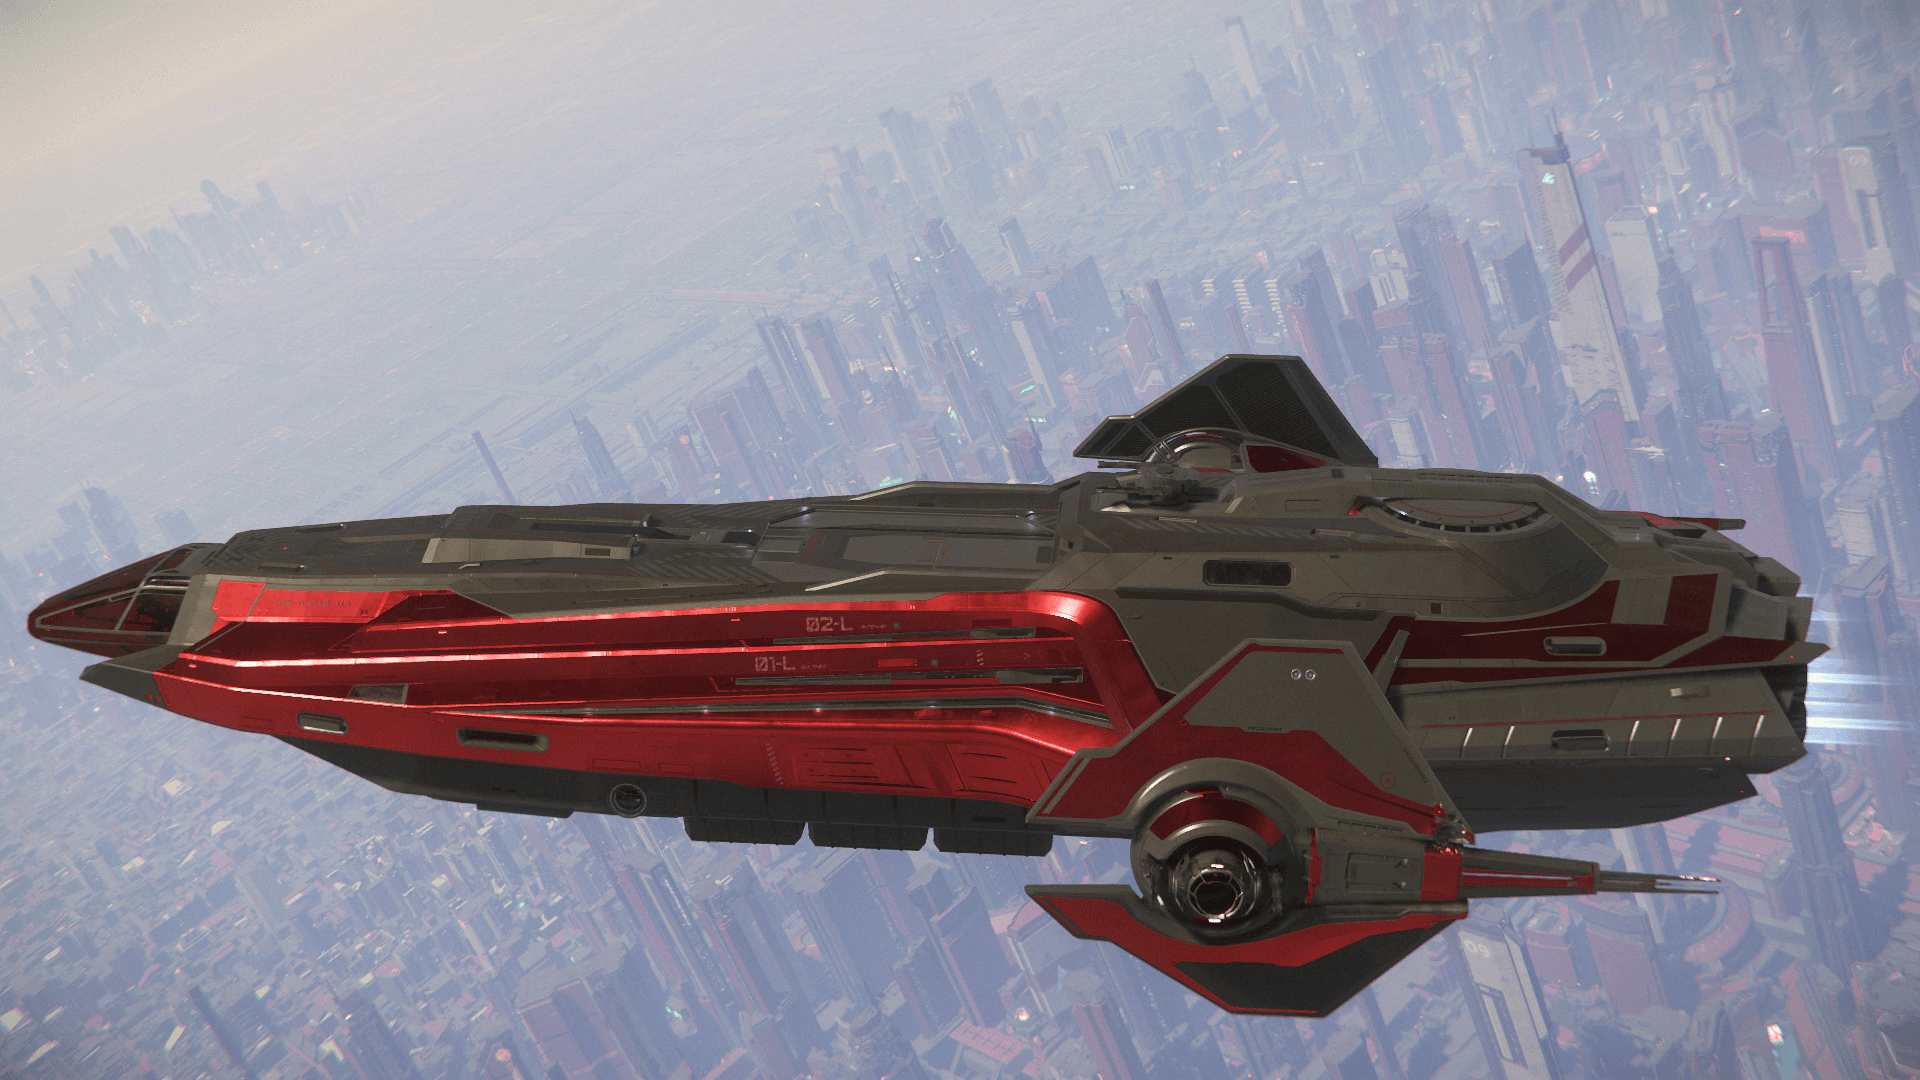 ANVIL CARRACK IAE 2952 – incl. Red Alert paint for Carrack and Pisces